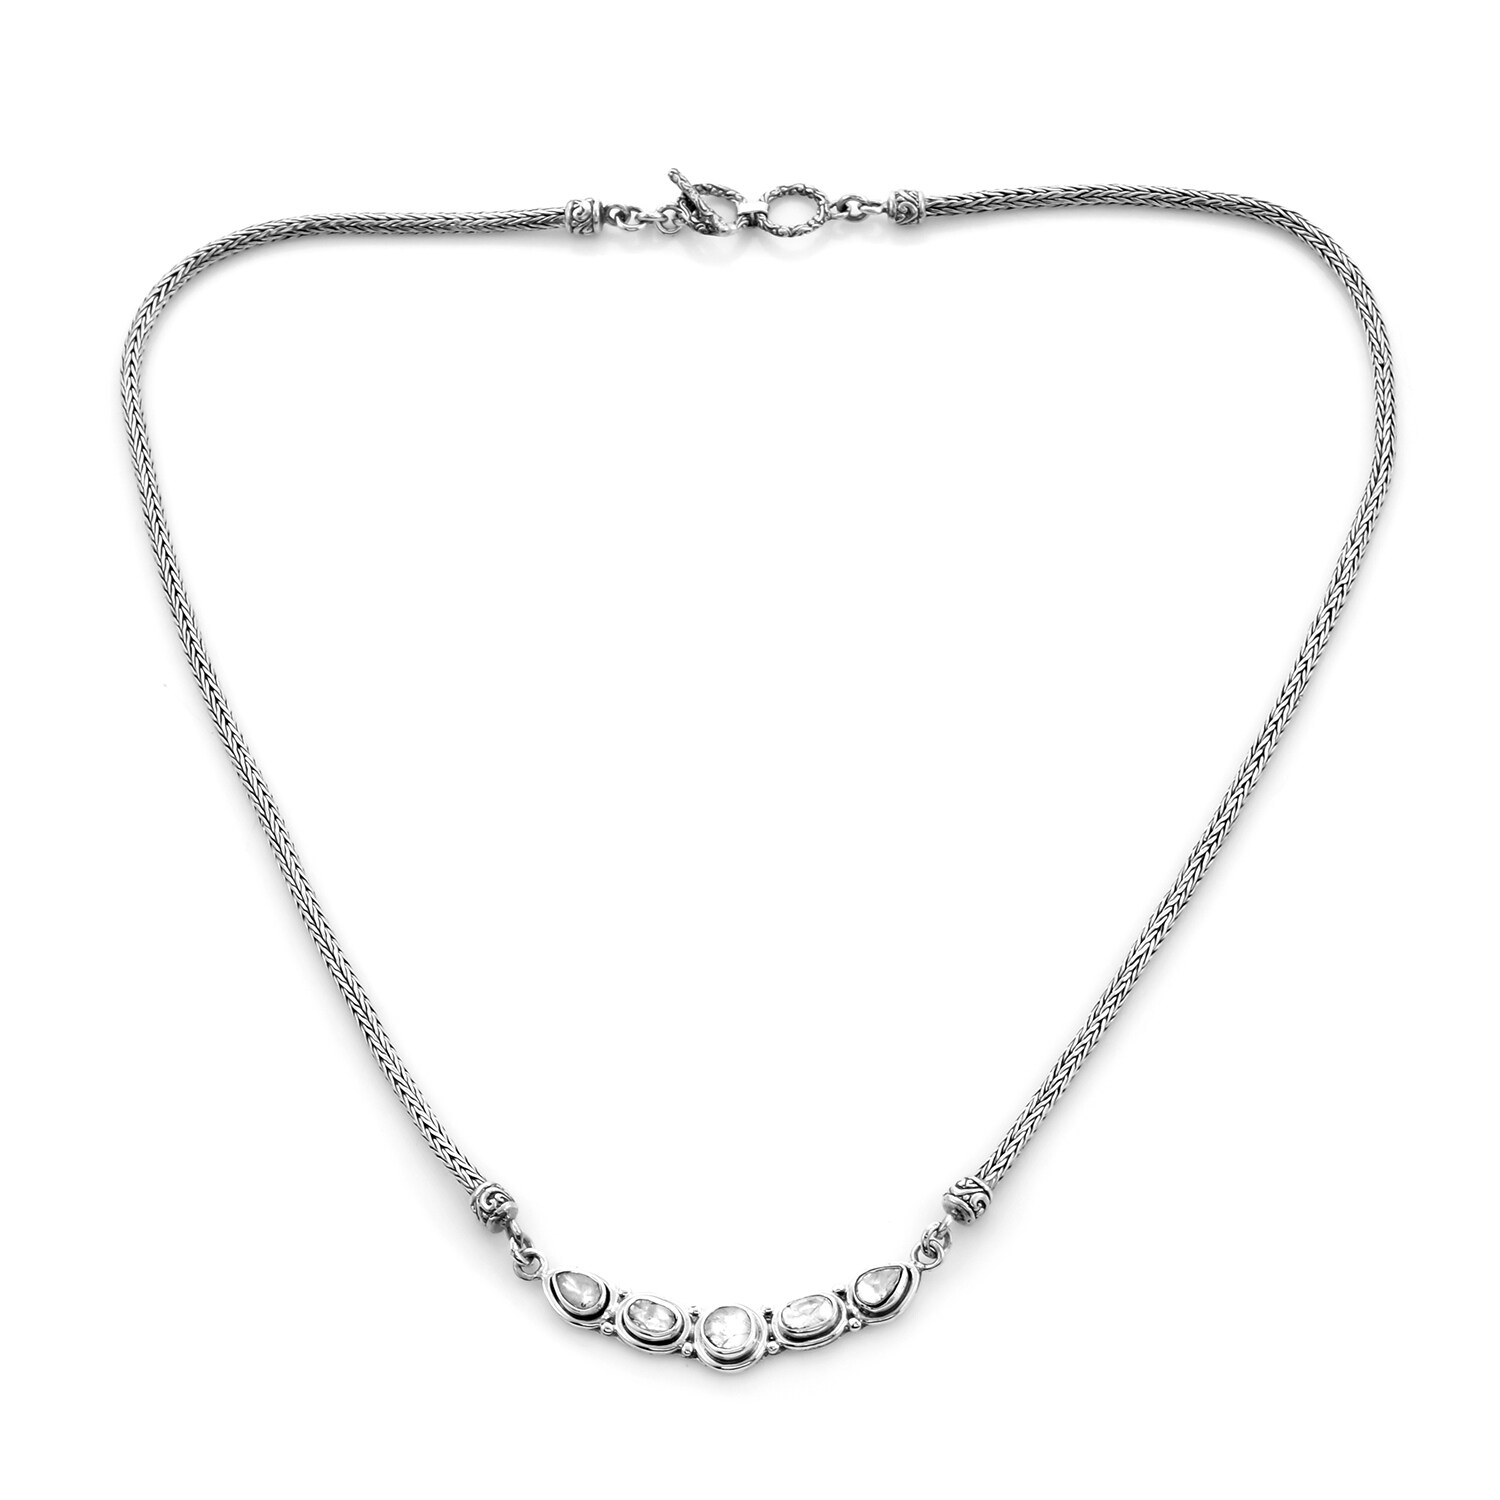 New Year Gift Polki Diamond Necklace 925 Sterling Silver Jewelry 16-18"